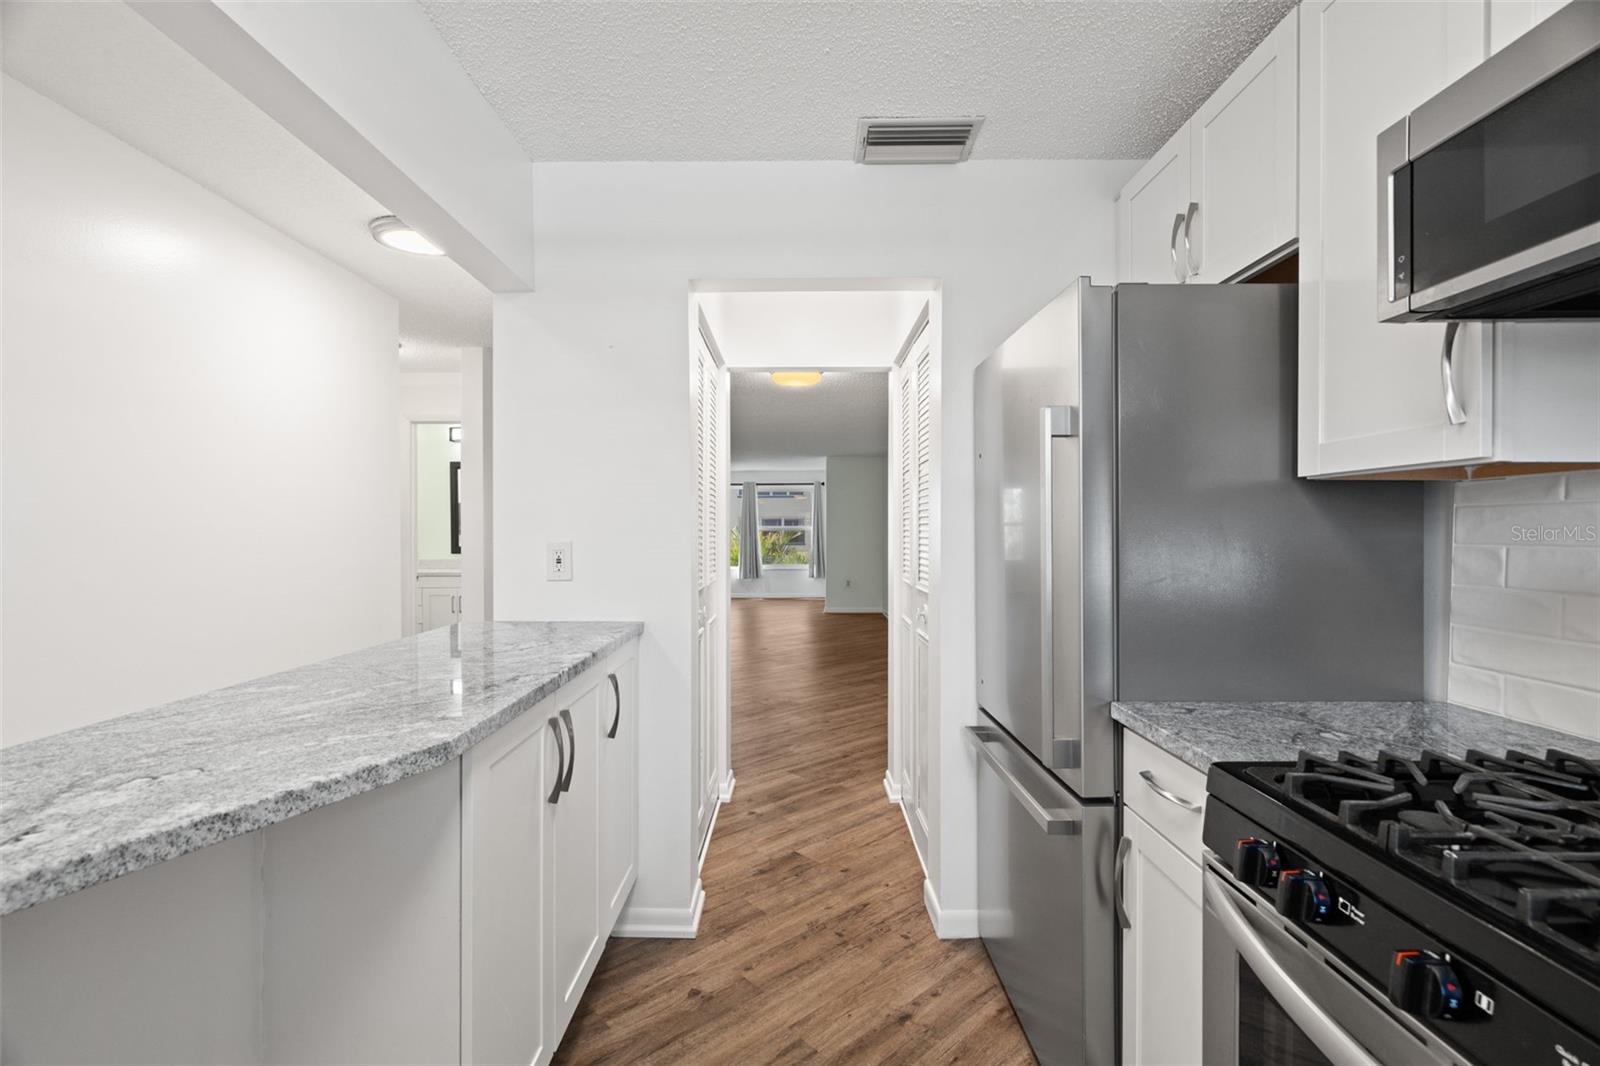 Pantry on the left, closet on the right as you pass through the kitchen into the open floor plan